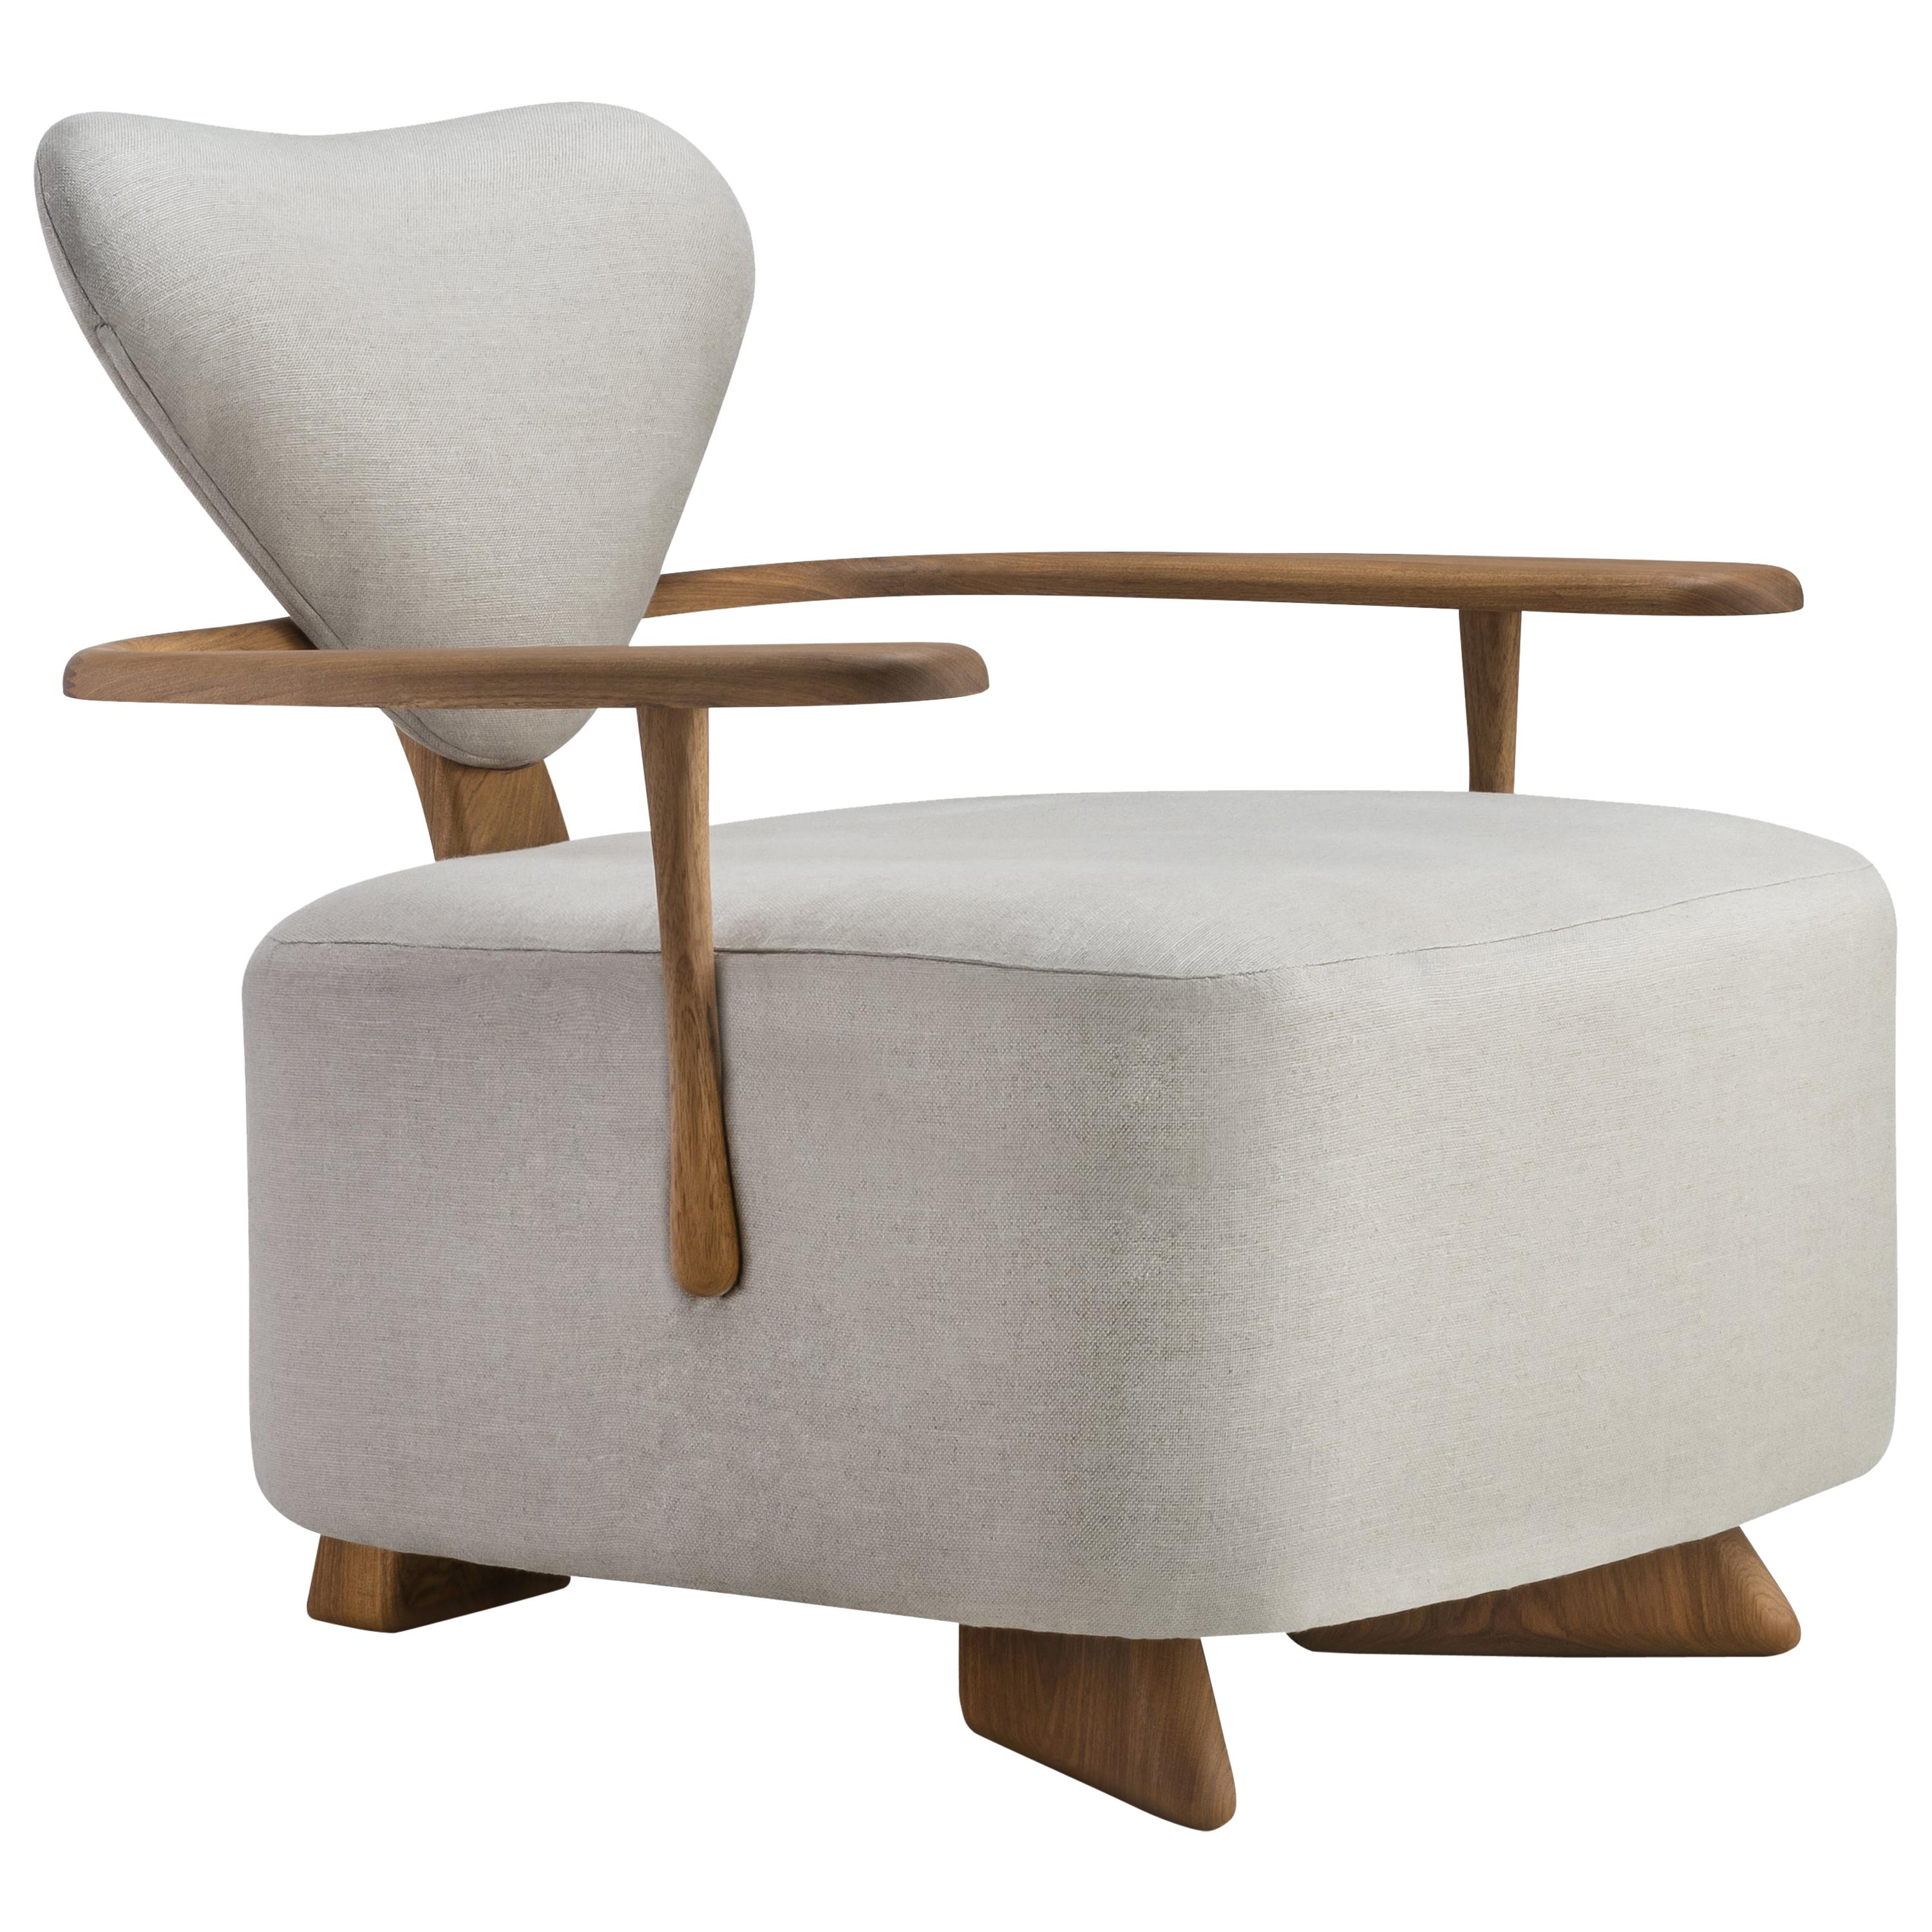 Contemporary Lounge Chair in Solid Brazilian Walnut Wood by Juliana Vasconcellos